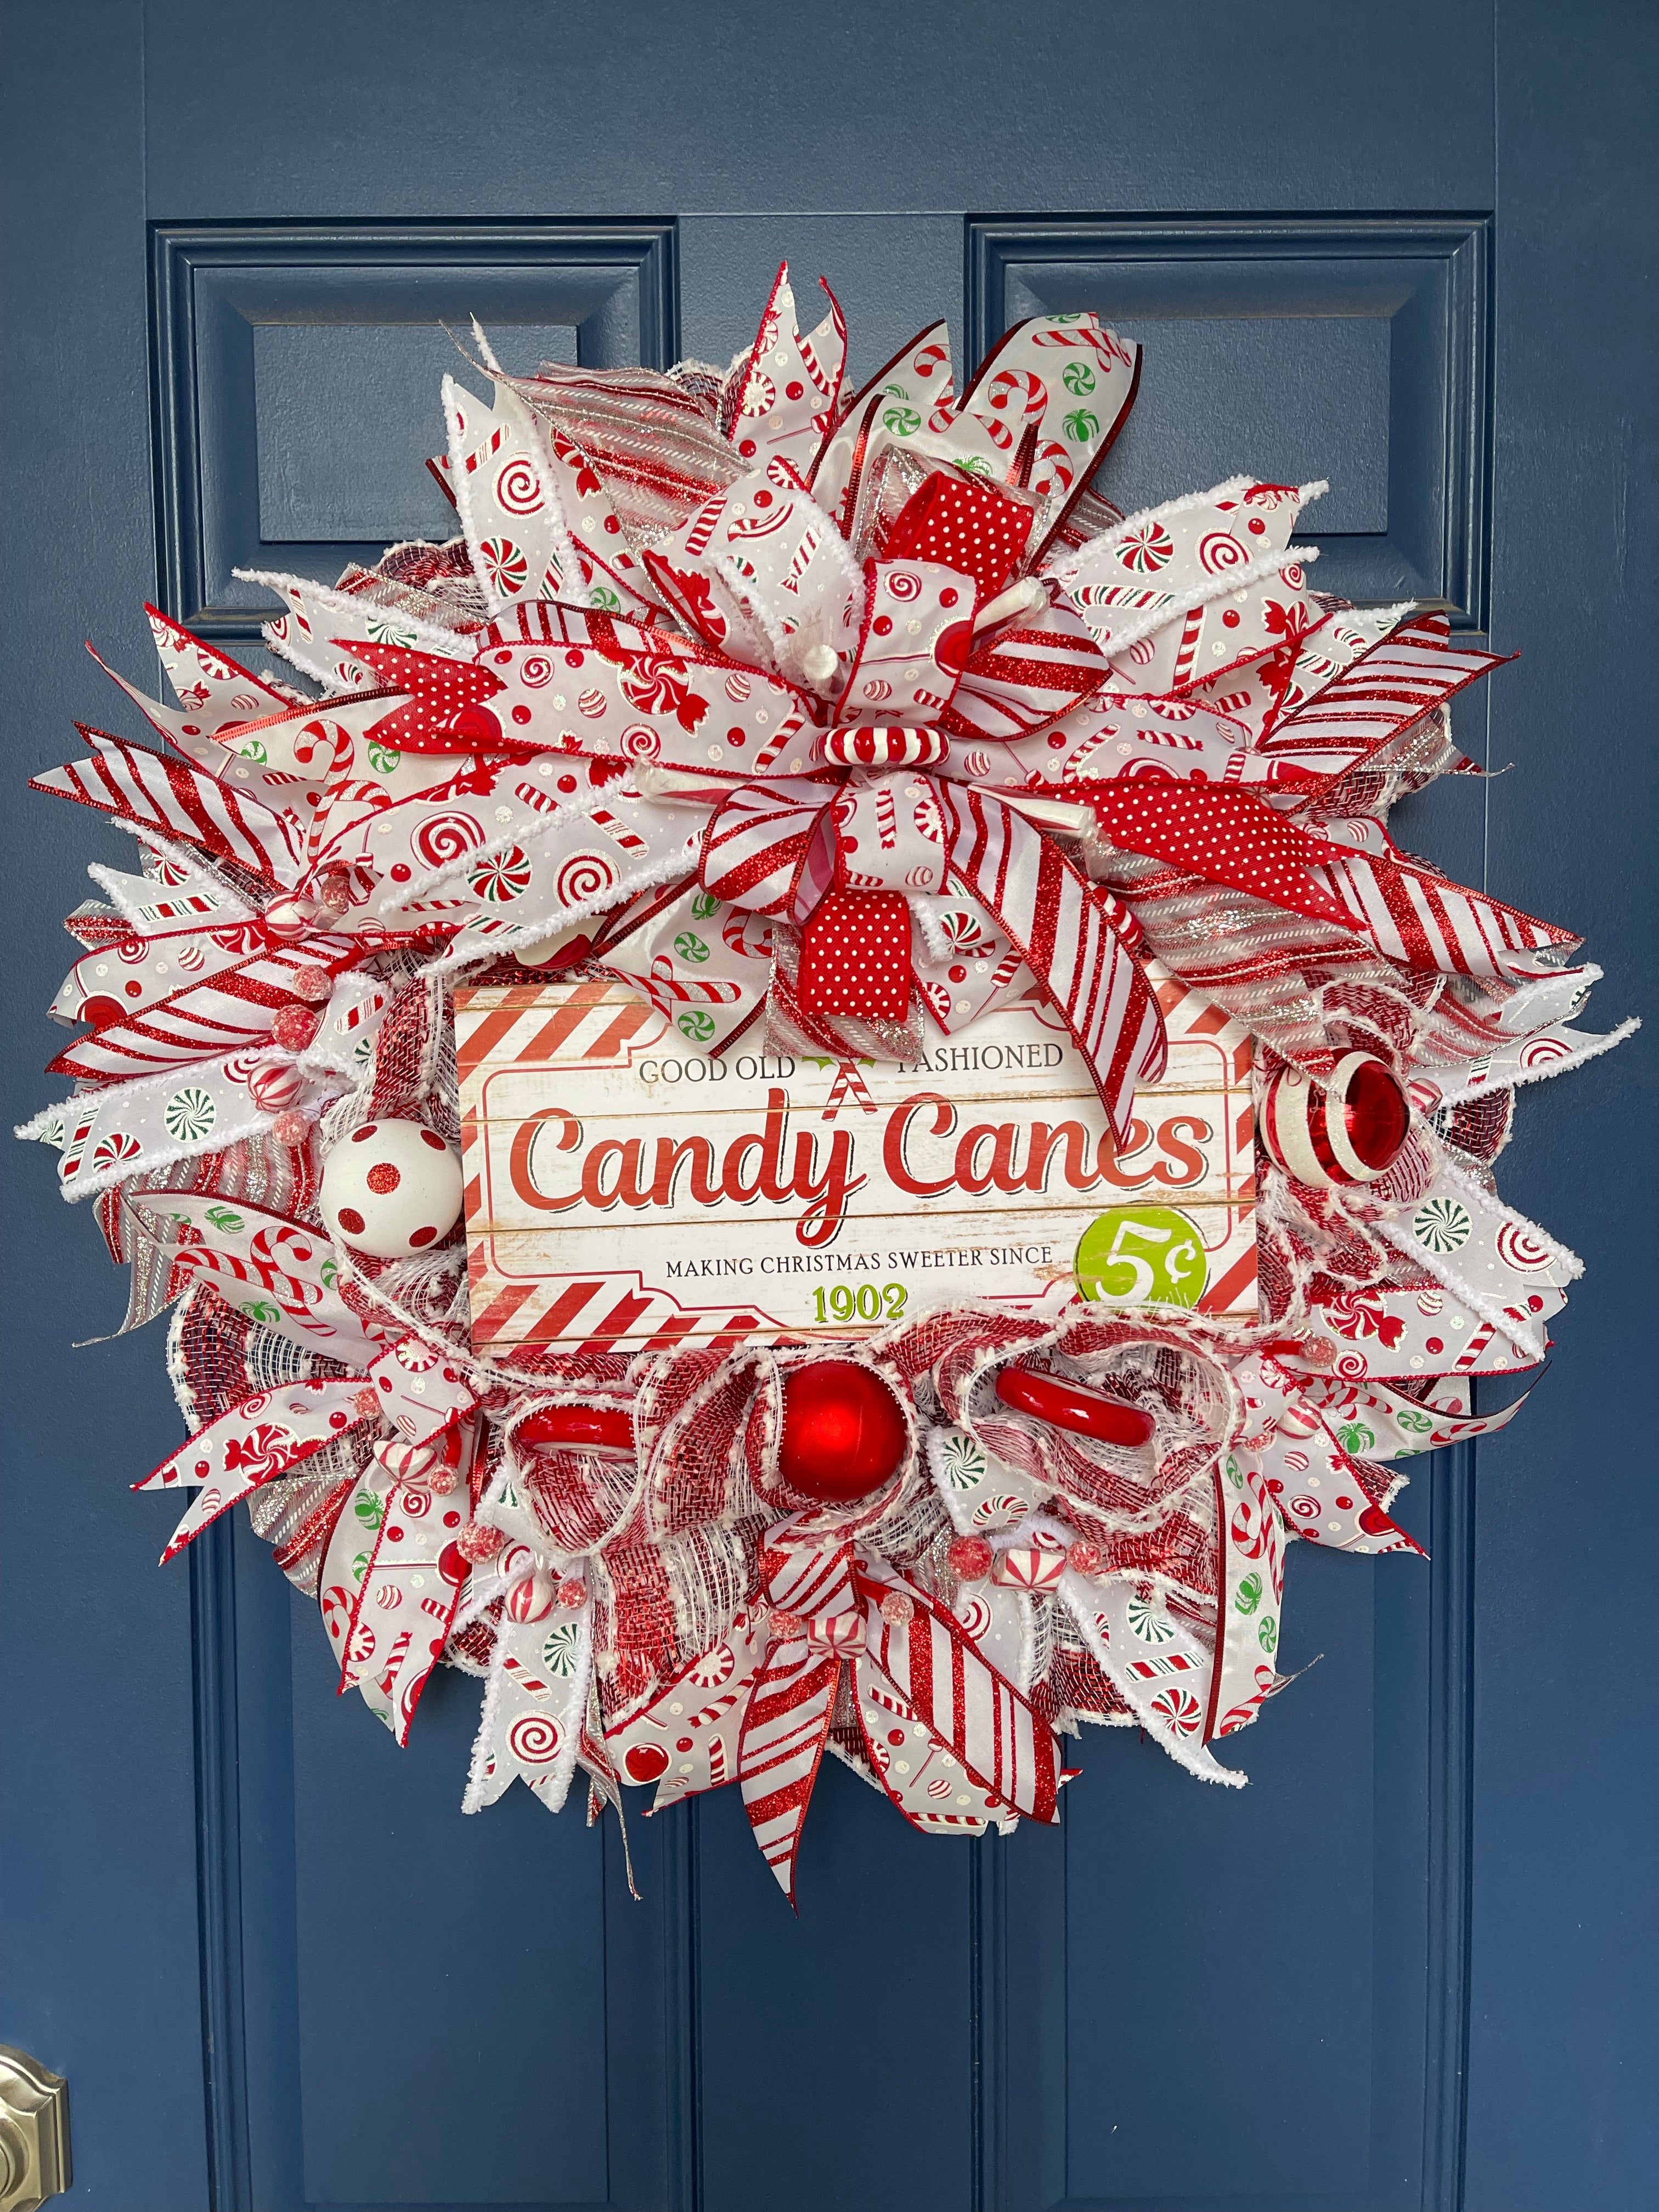 "Old Fashioned Candy Canes" candy cane and peppermint themed Christmas wreath hanging on door 